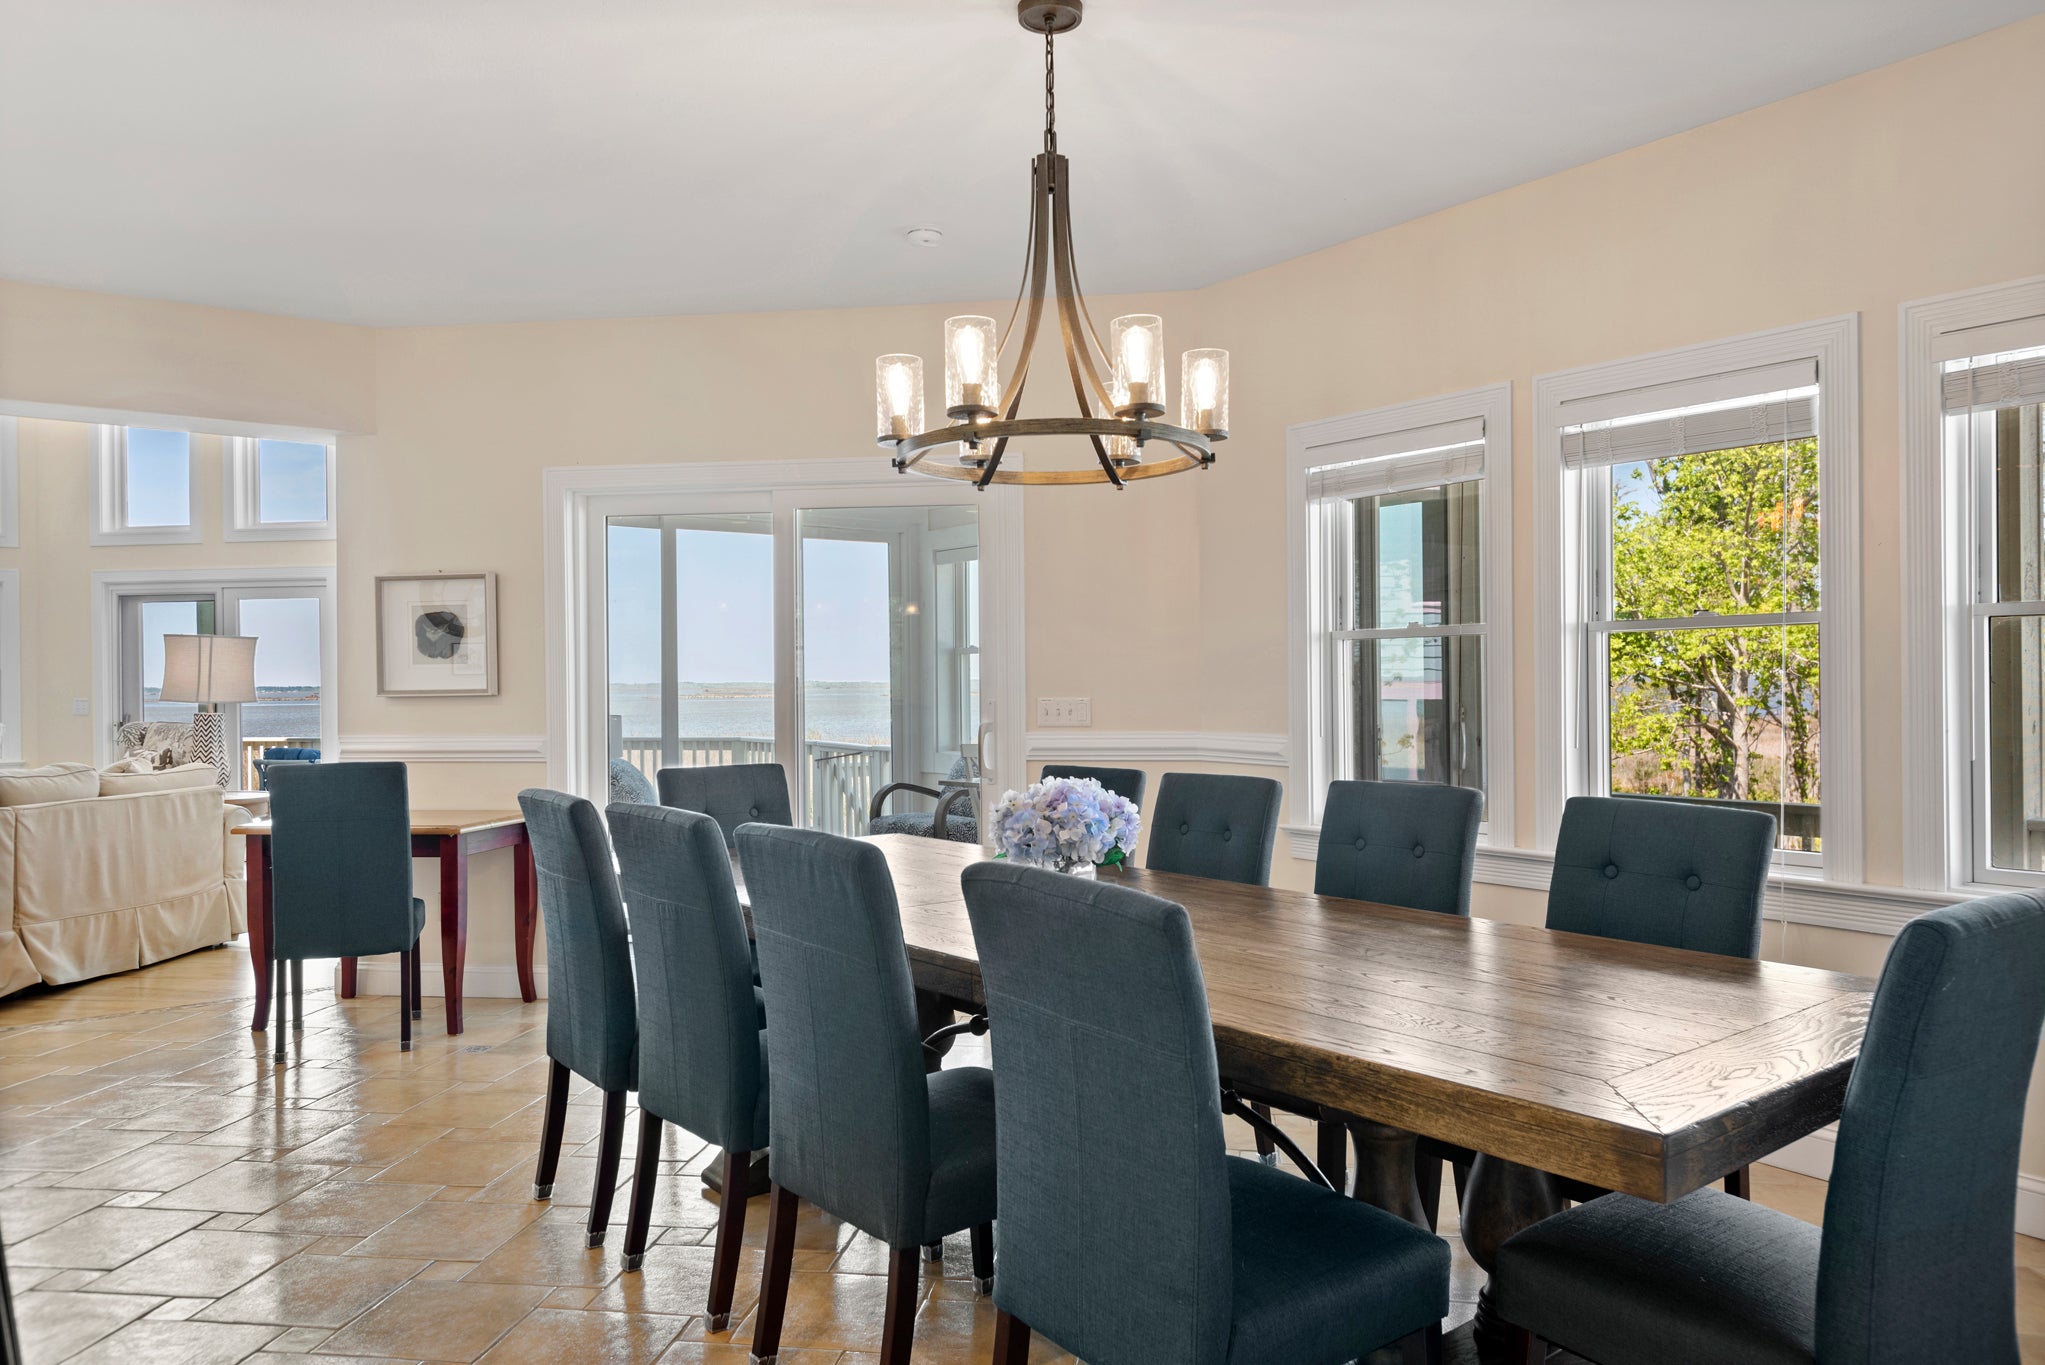 CC009: All About The View | Mid Level Dining Area